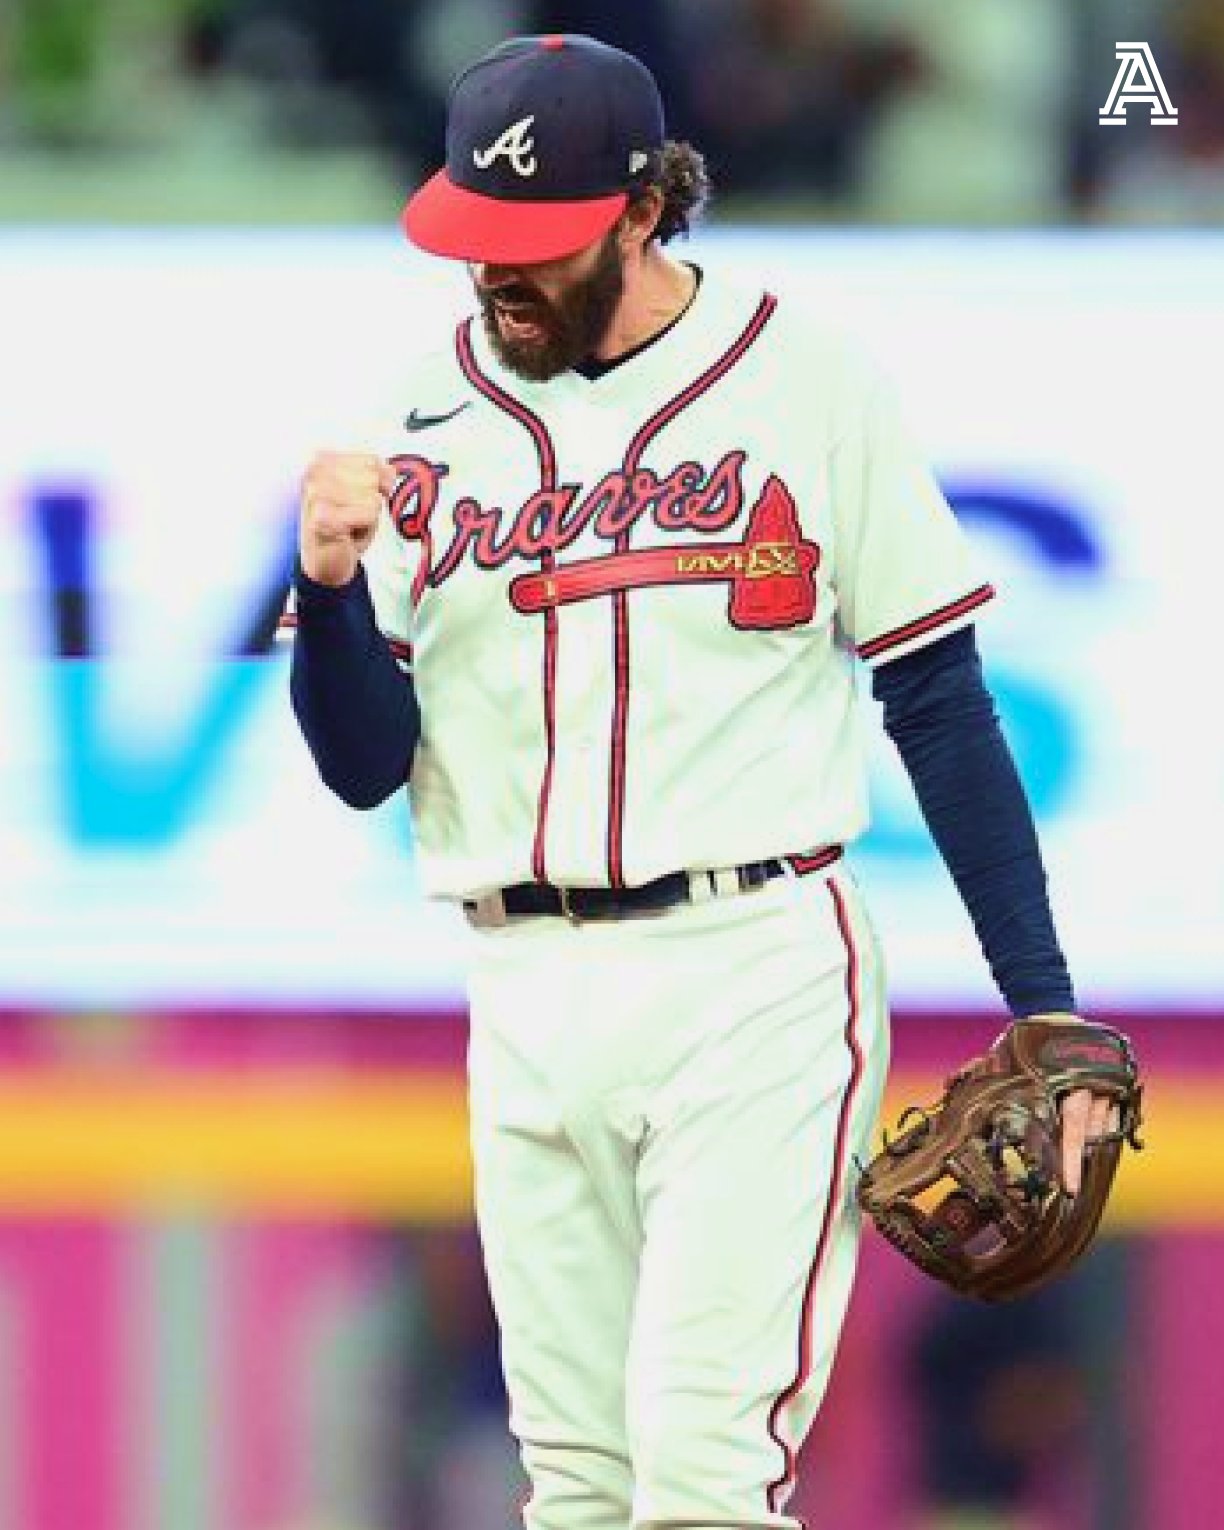 MLB - For the 5th straight season, the Atlanta Braves are NL East